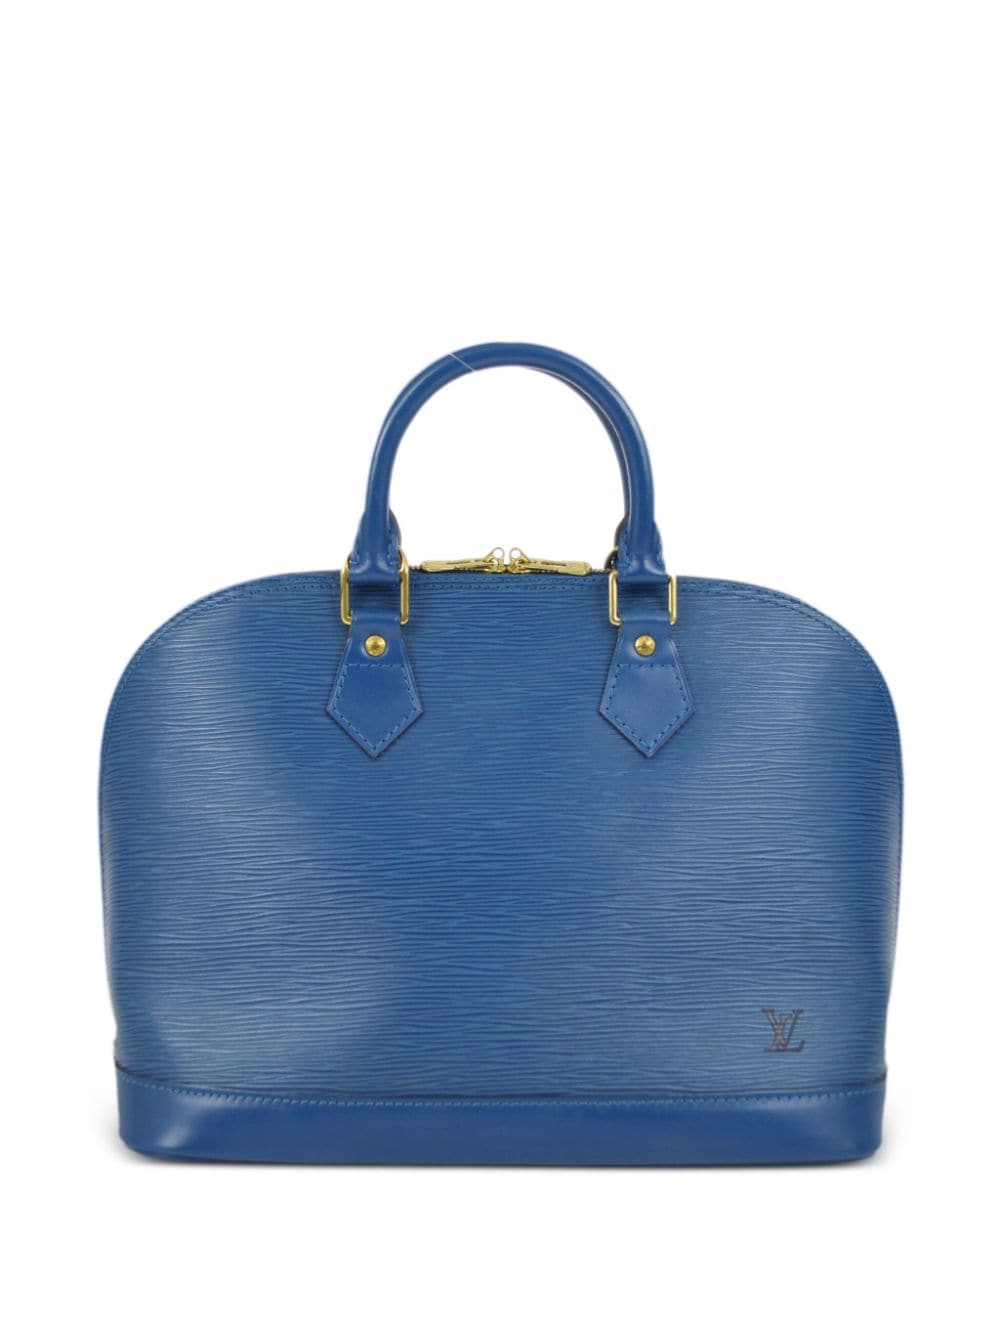 Louis Vuitton Pre-Owned 1997 pre-owned Alma PM tote bag - Blue